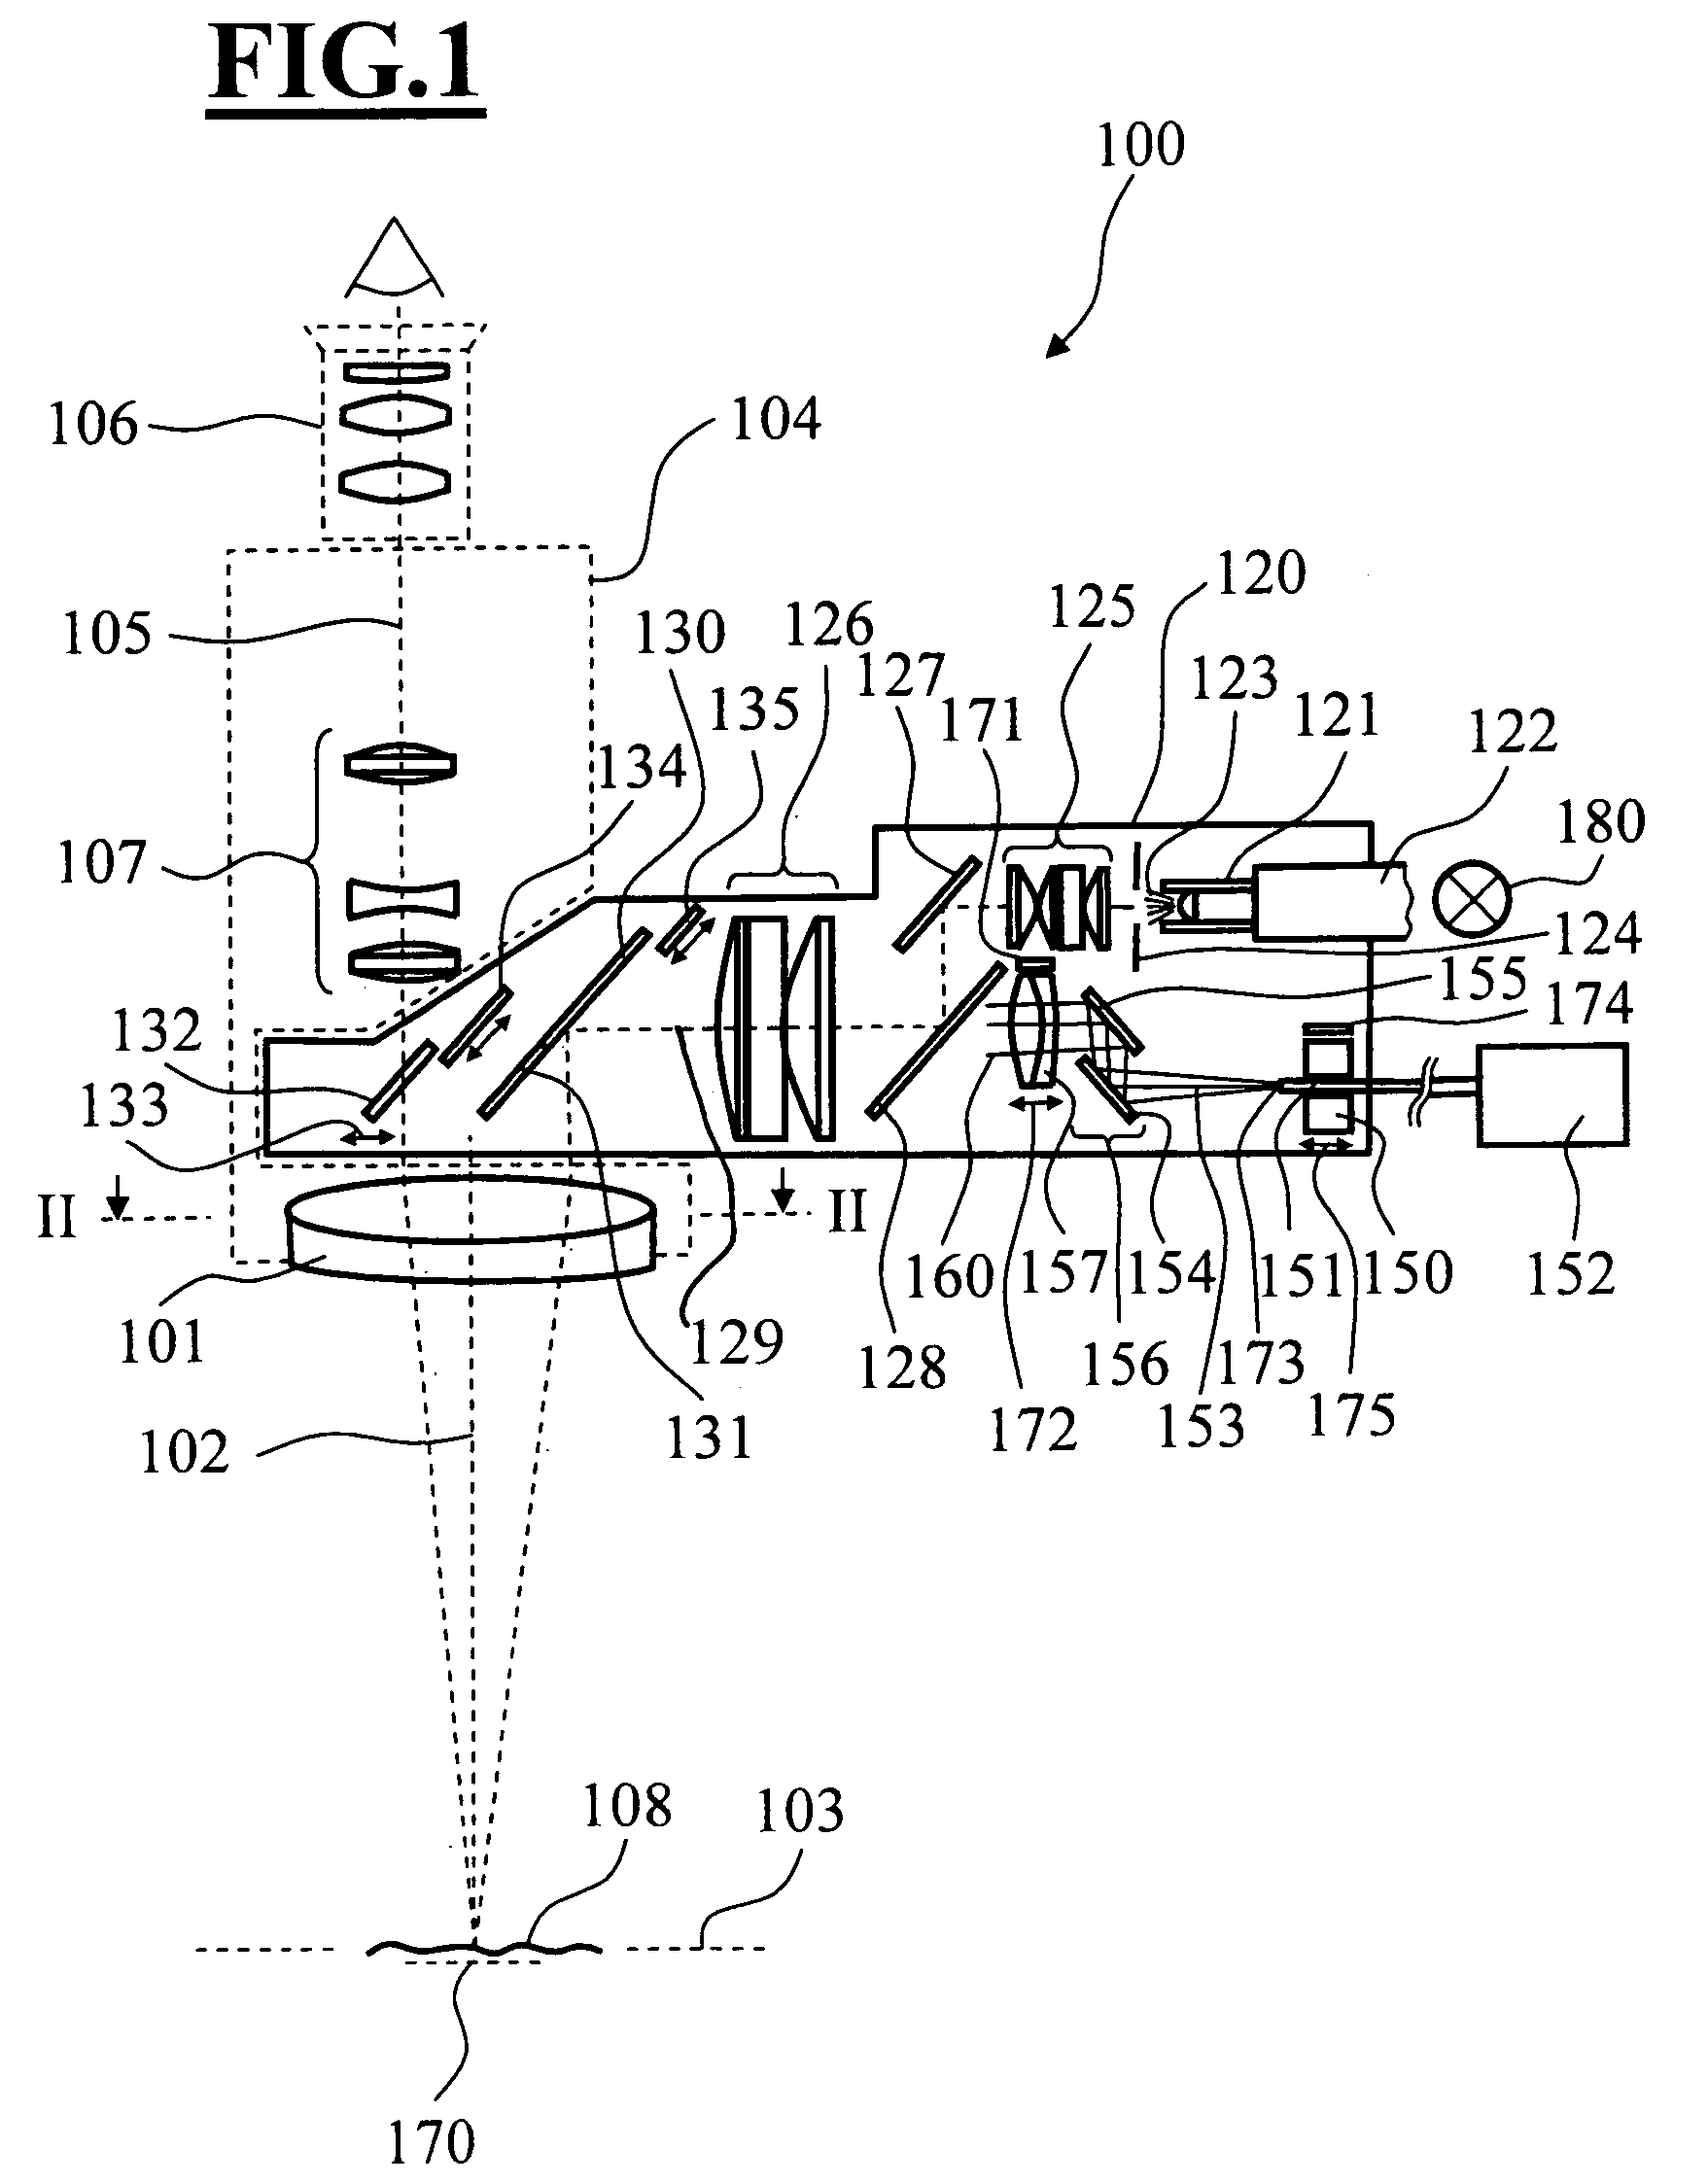 Surgical microscope having an OCT-system and a surgical microscope illuminating module having an OCT-system